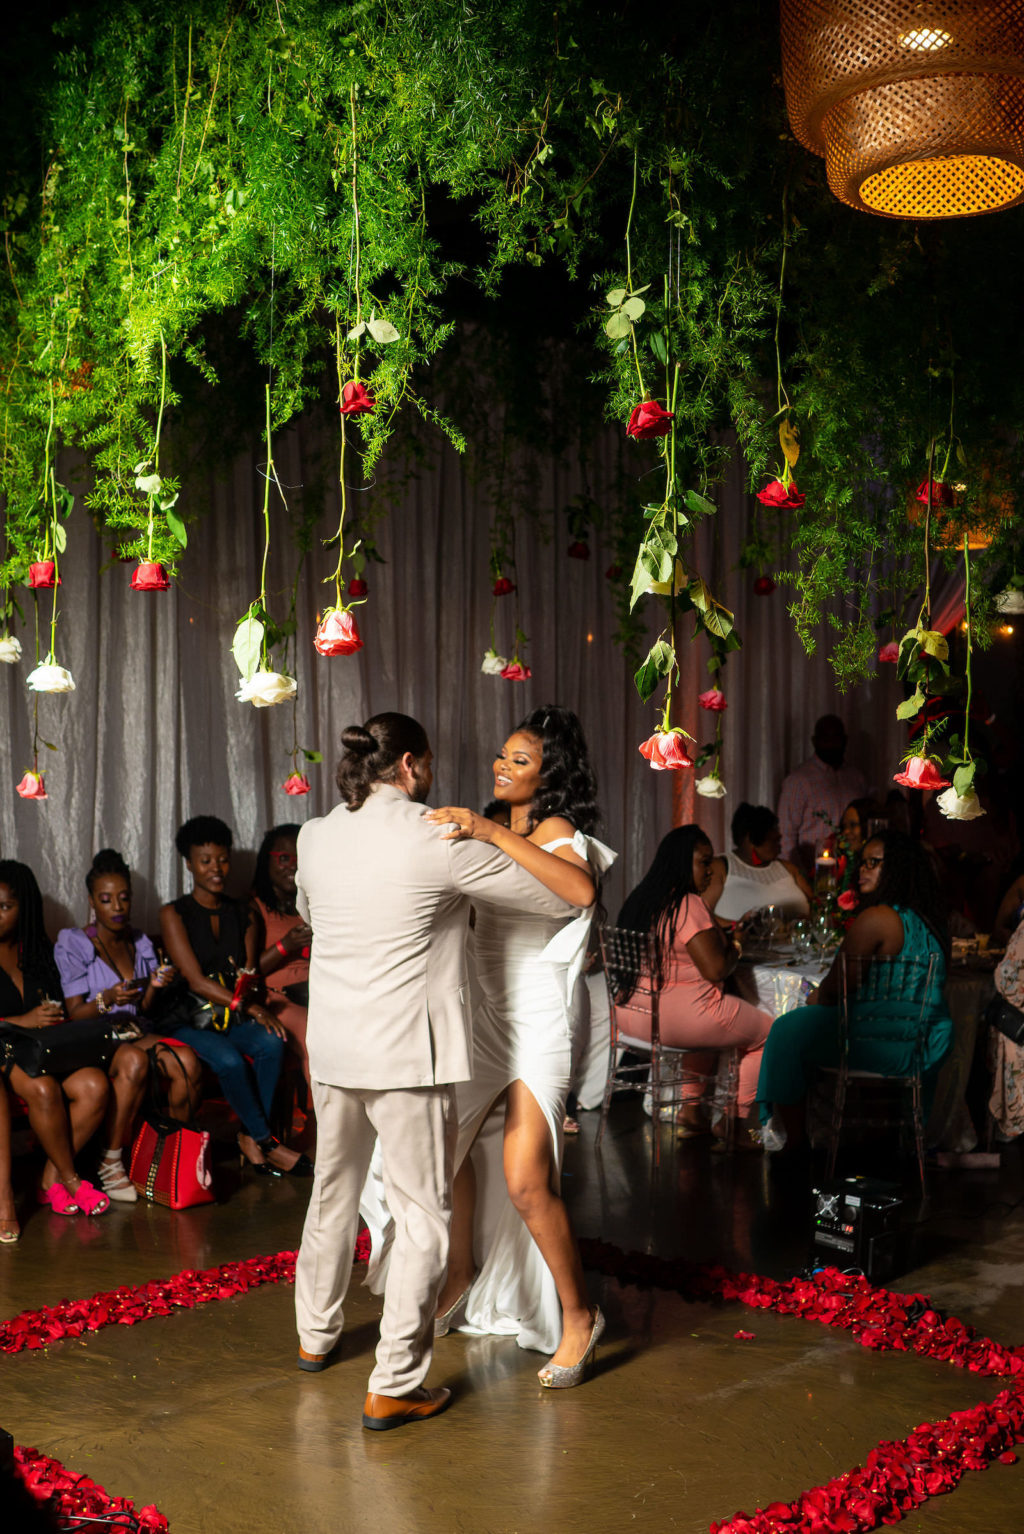 Modern Florida Bride and Groom First Dance Under Suspended Florals, Dance Floor Sounded by Rose Petals | Tampa Bay Event Venue 7th and Grove